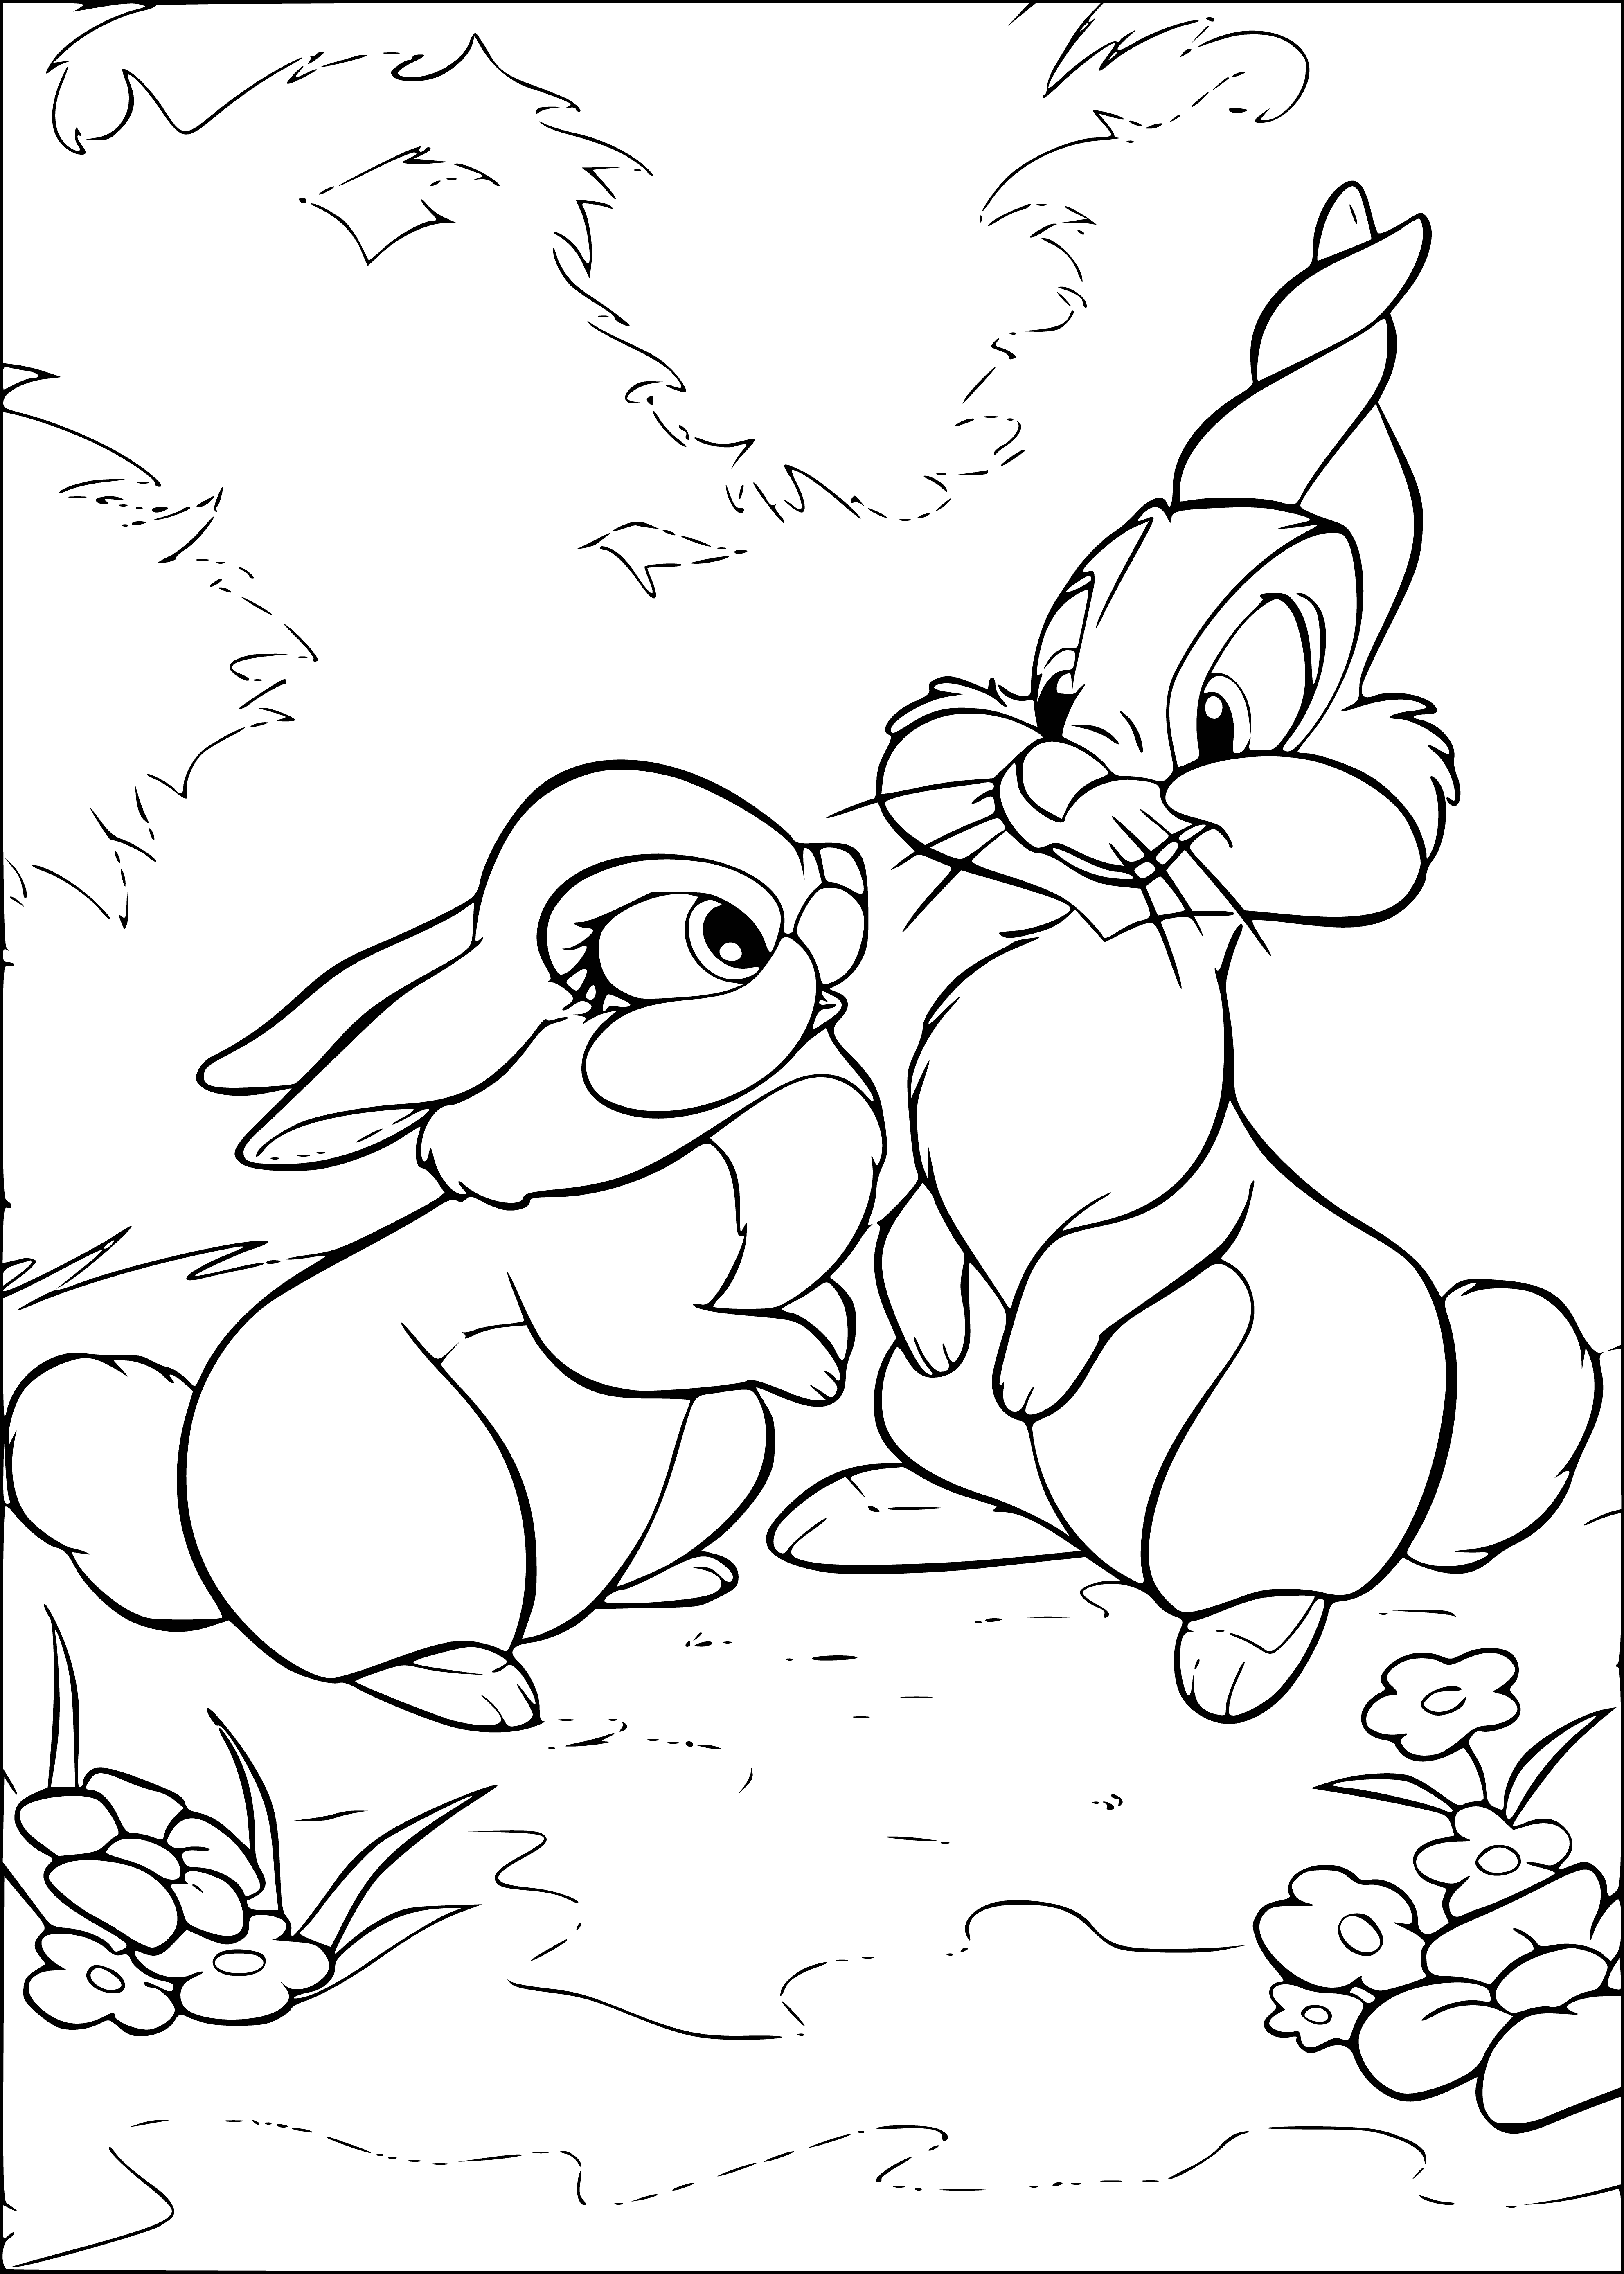 Hares coloring page